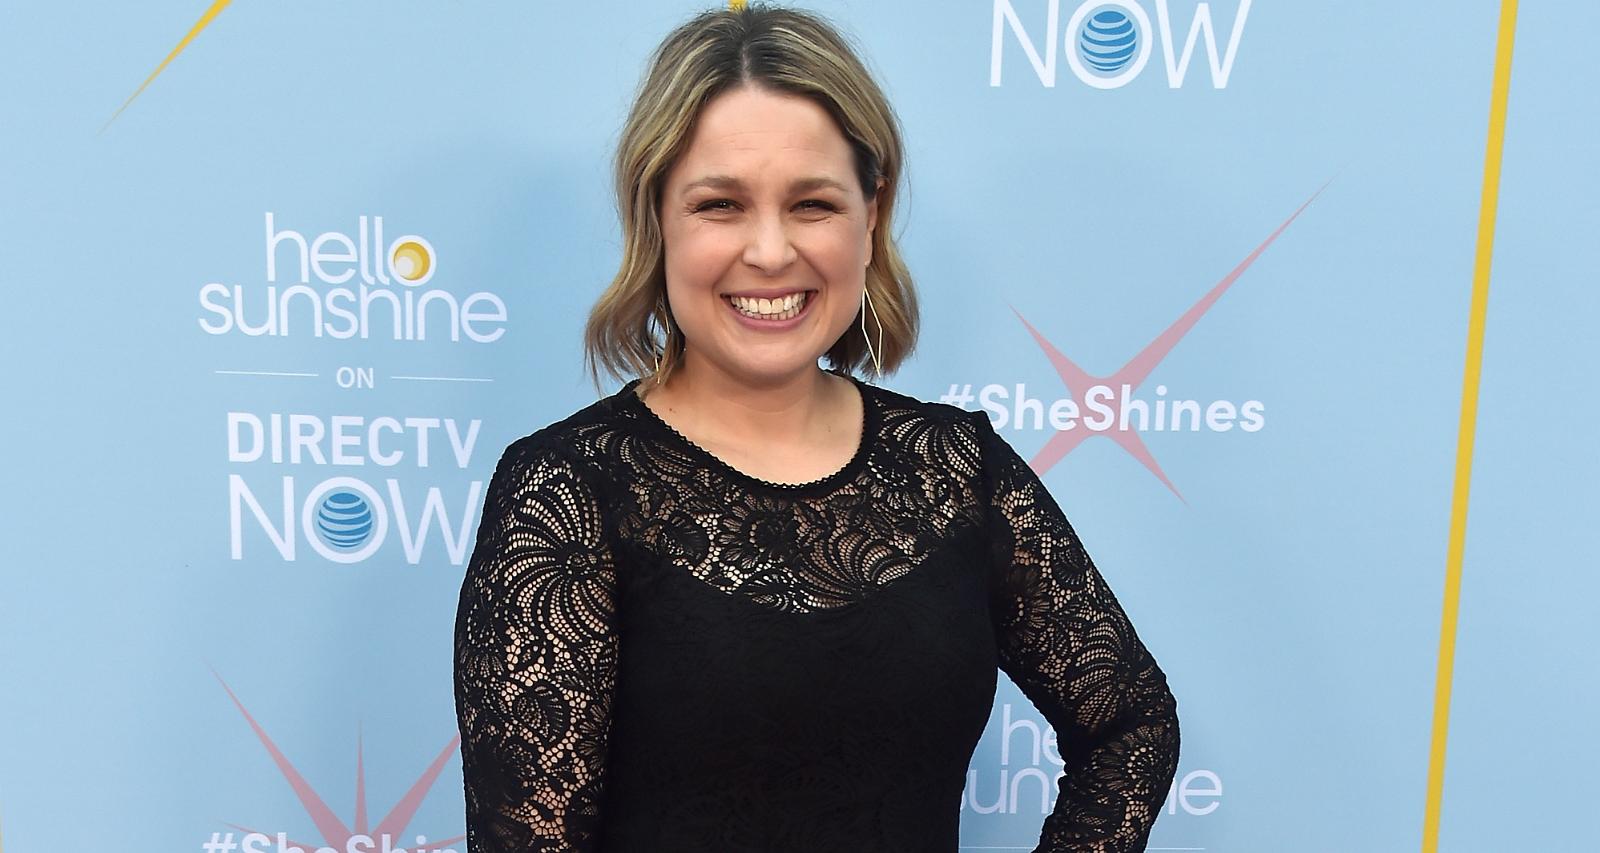 Joanna Teplin Wiki, Age, Family, Parents, Husband, Kids, Education and Facts about the Star of Netflix’s “Get Organized with The Home Edit”